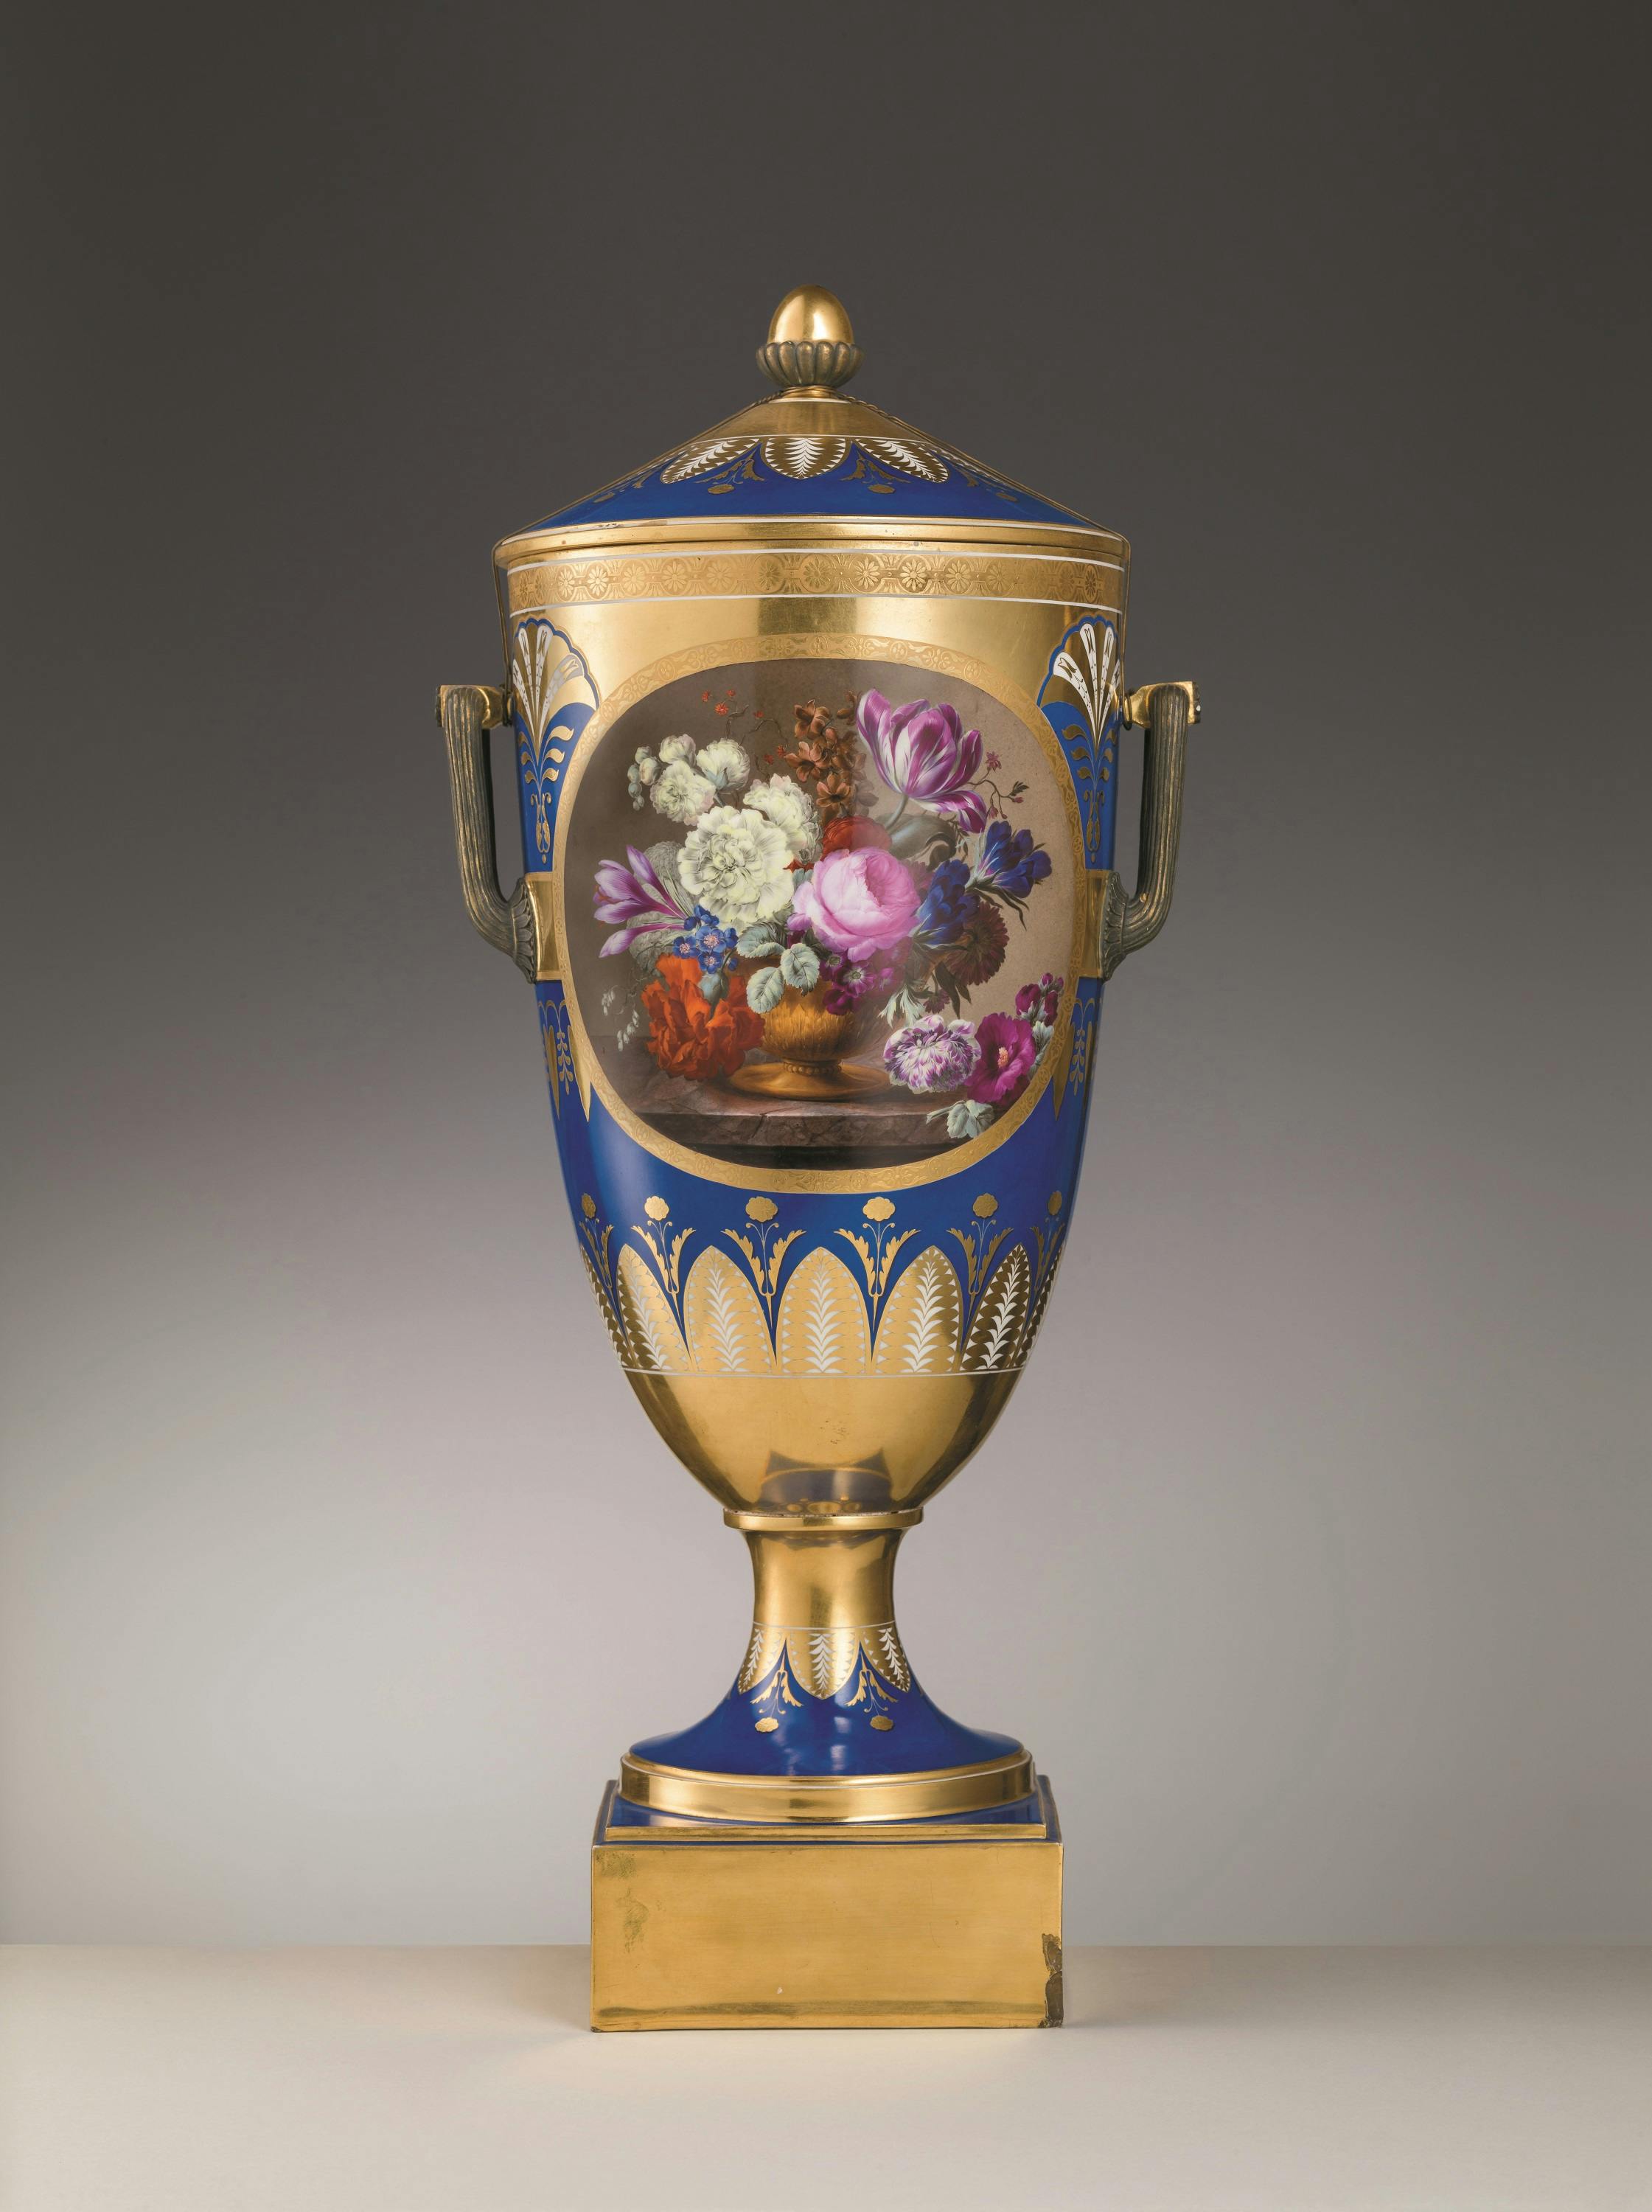 Pair of two-handled vases with lid